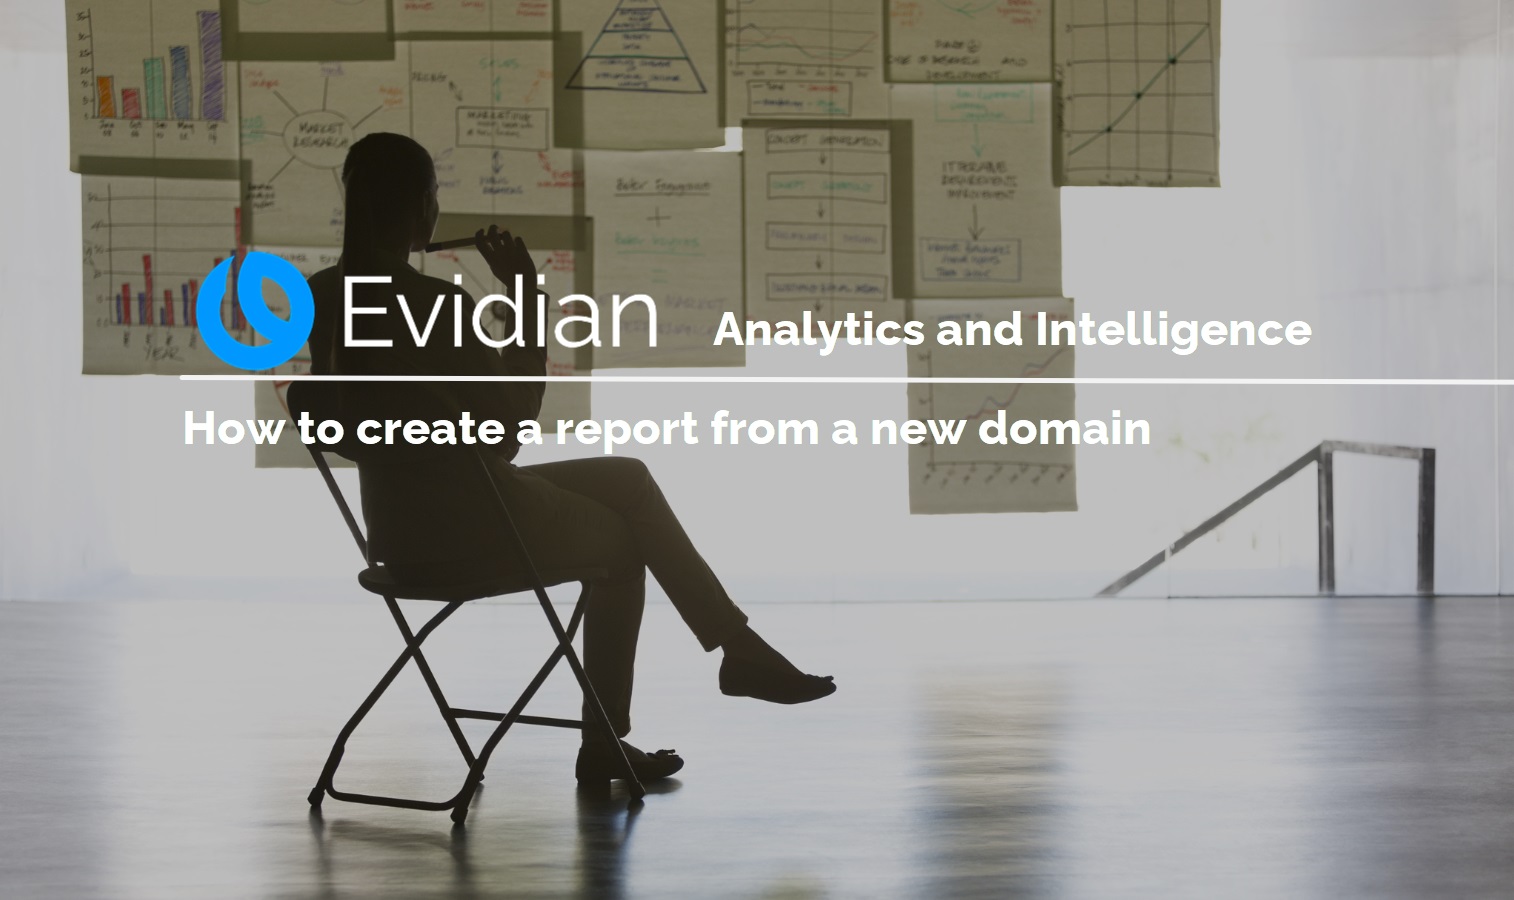 How to create an analytics report from a new domain for Evidian IAM